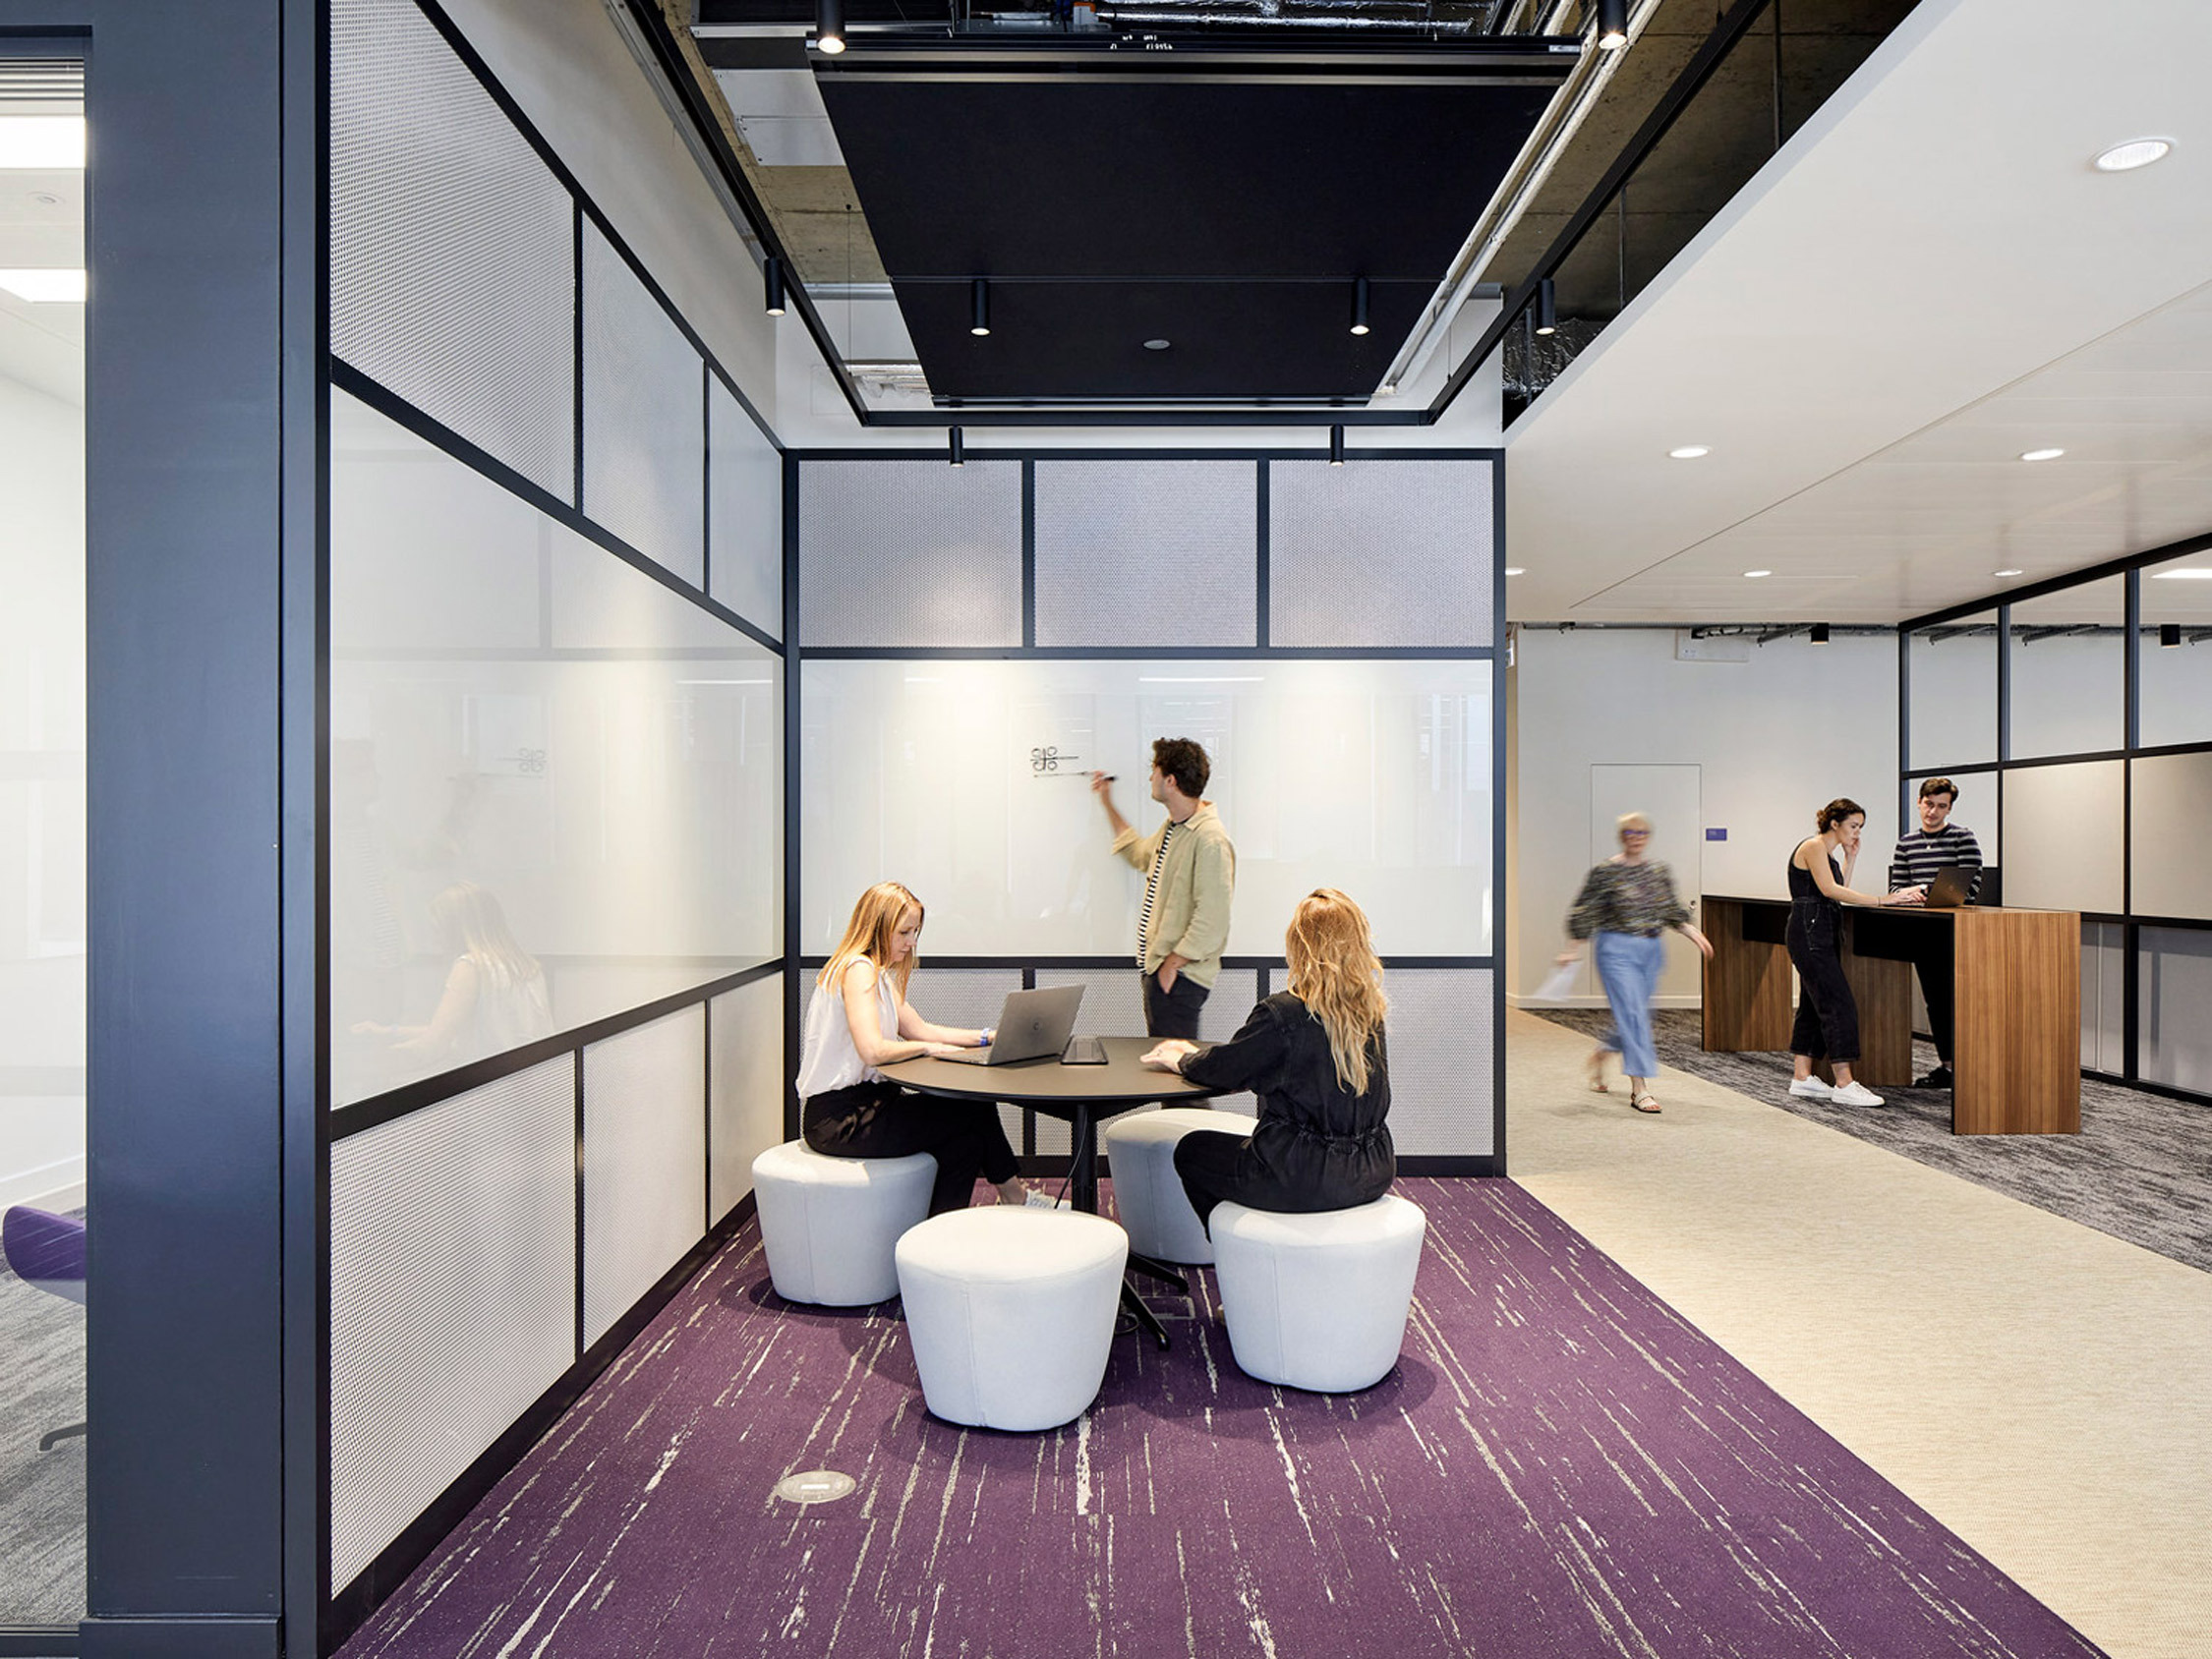 Modern office space featuring glass partitions with black frames, enhancing the open-concept layout. Whiteboard session in progress amidst plush white seating over a vibrant purple carpet, with ambient lighting and a wooden reception desk anchoring the background.